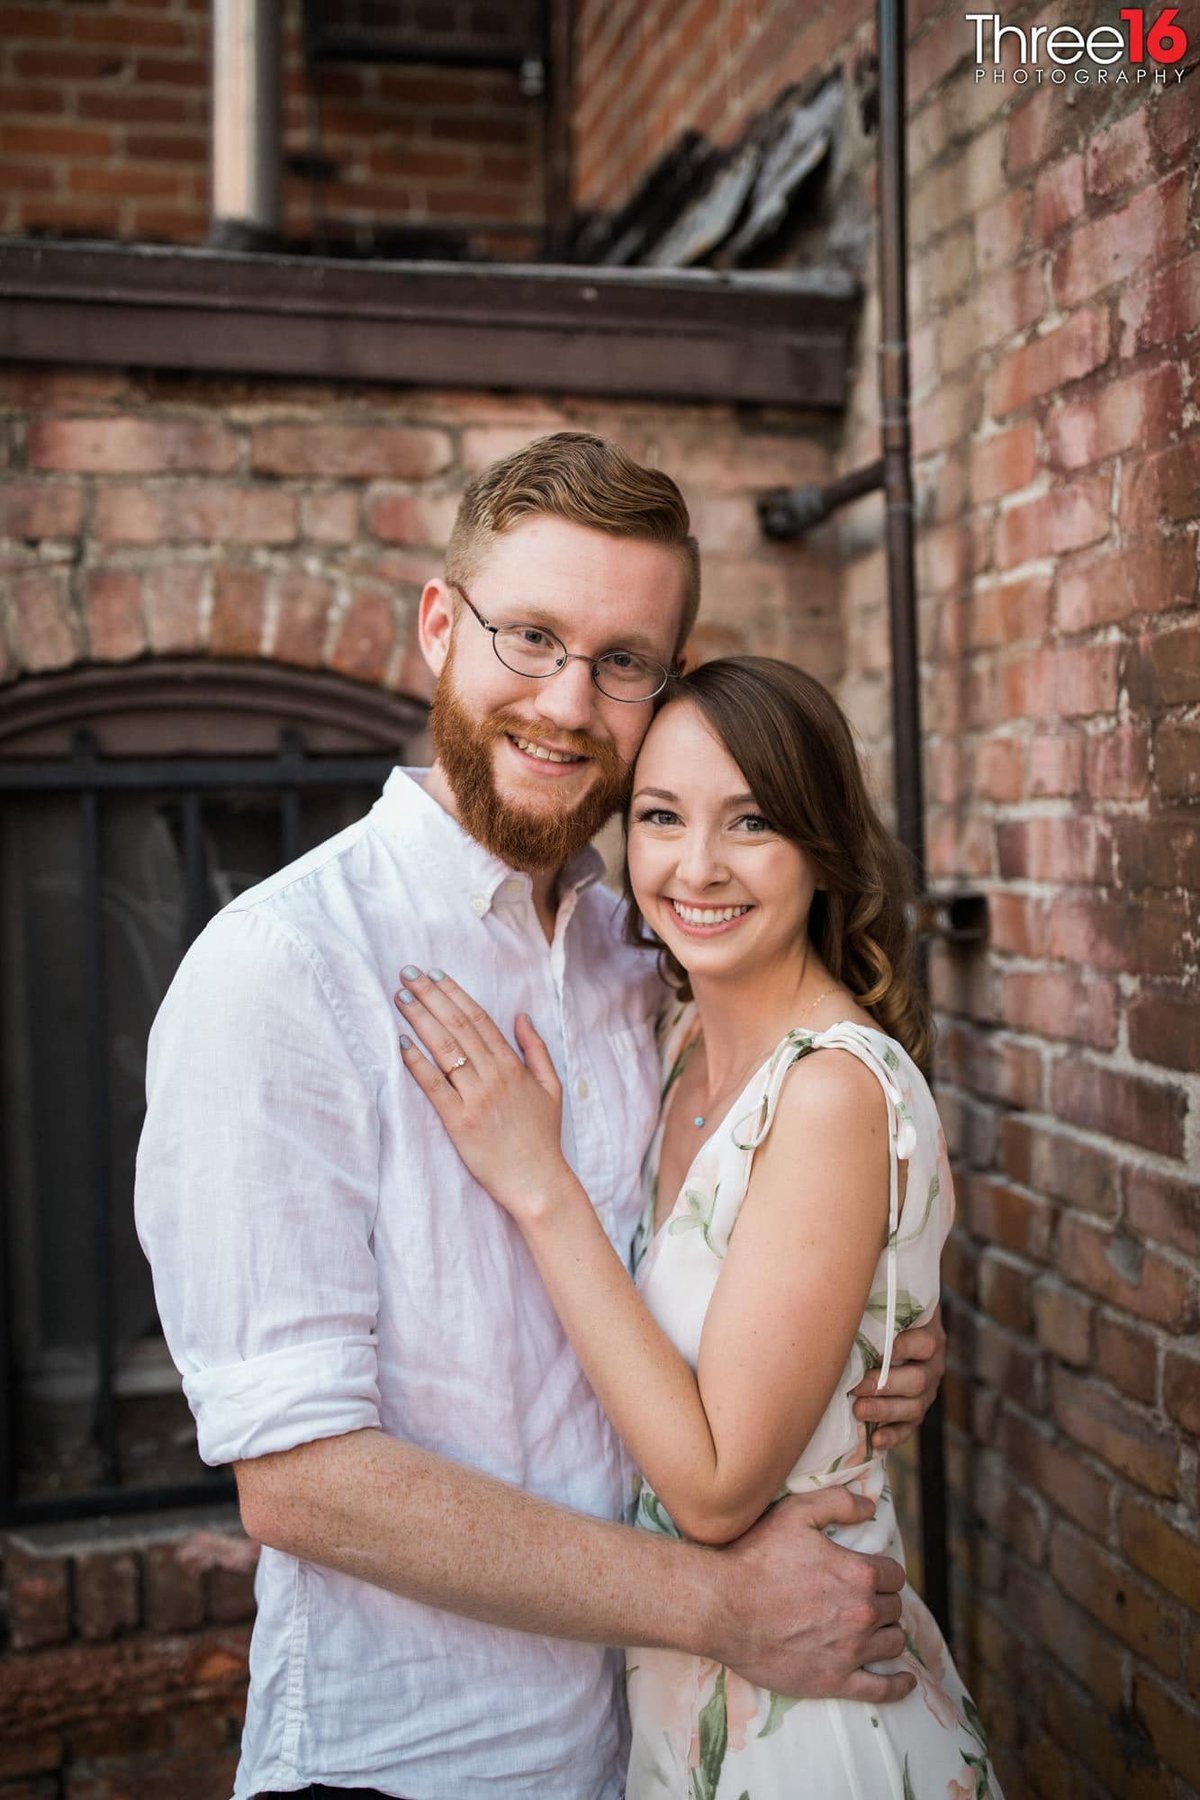 Engaged couple embrace one another in an Old Towne Orange alley